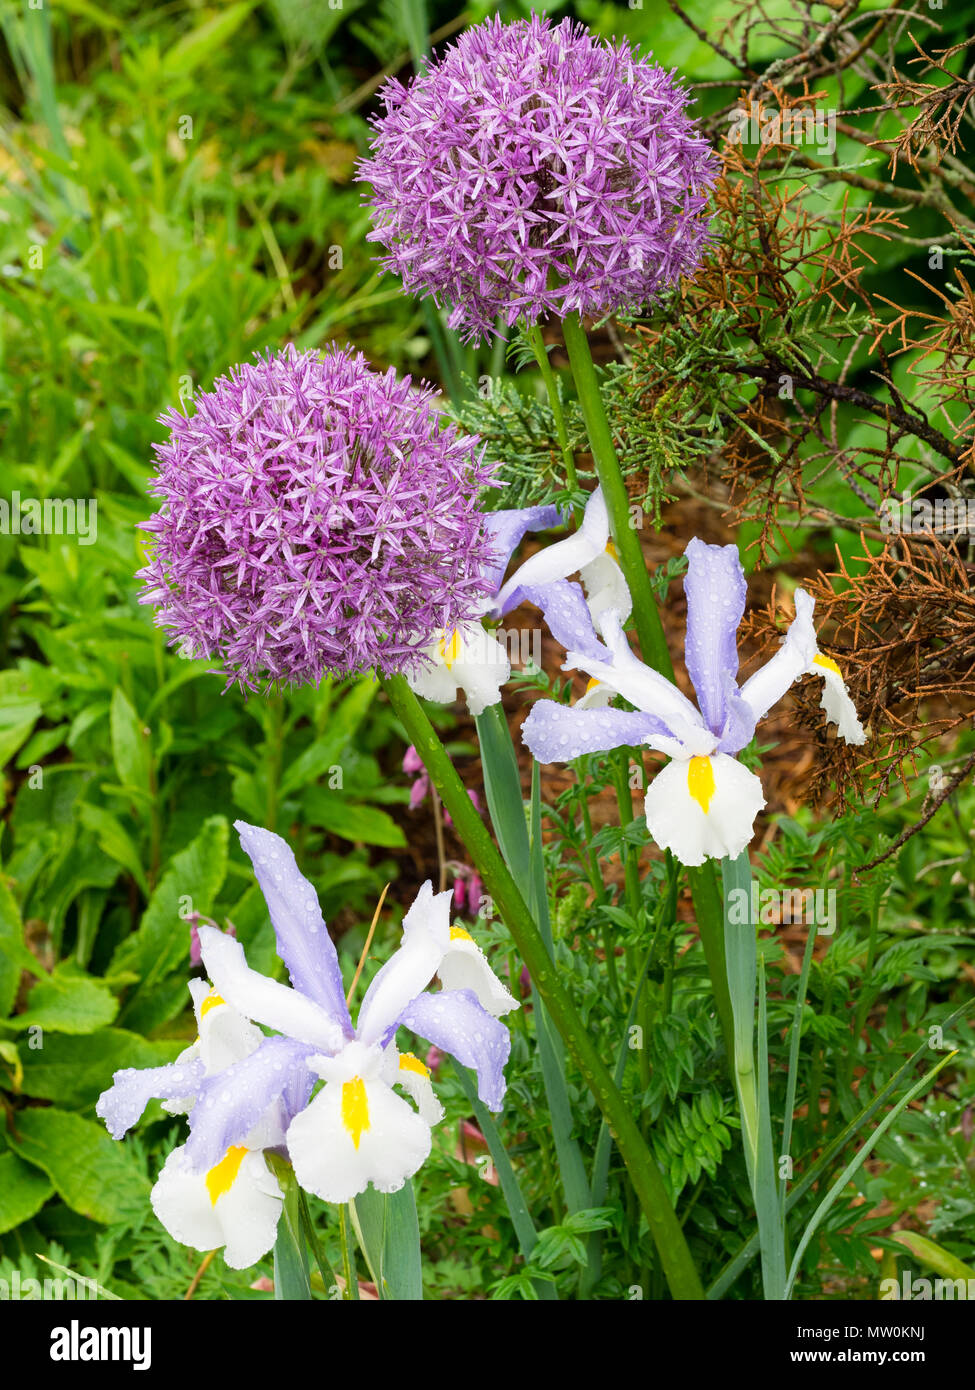 Flowers of the dutch iris, Iris x hollandica 'Silvery Beauty' contrast with the mauve globes of Allium giganteum in an early summer border Stock Photo